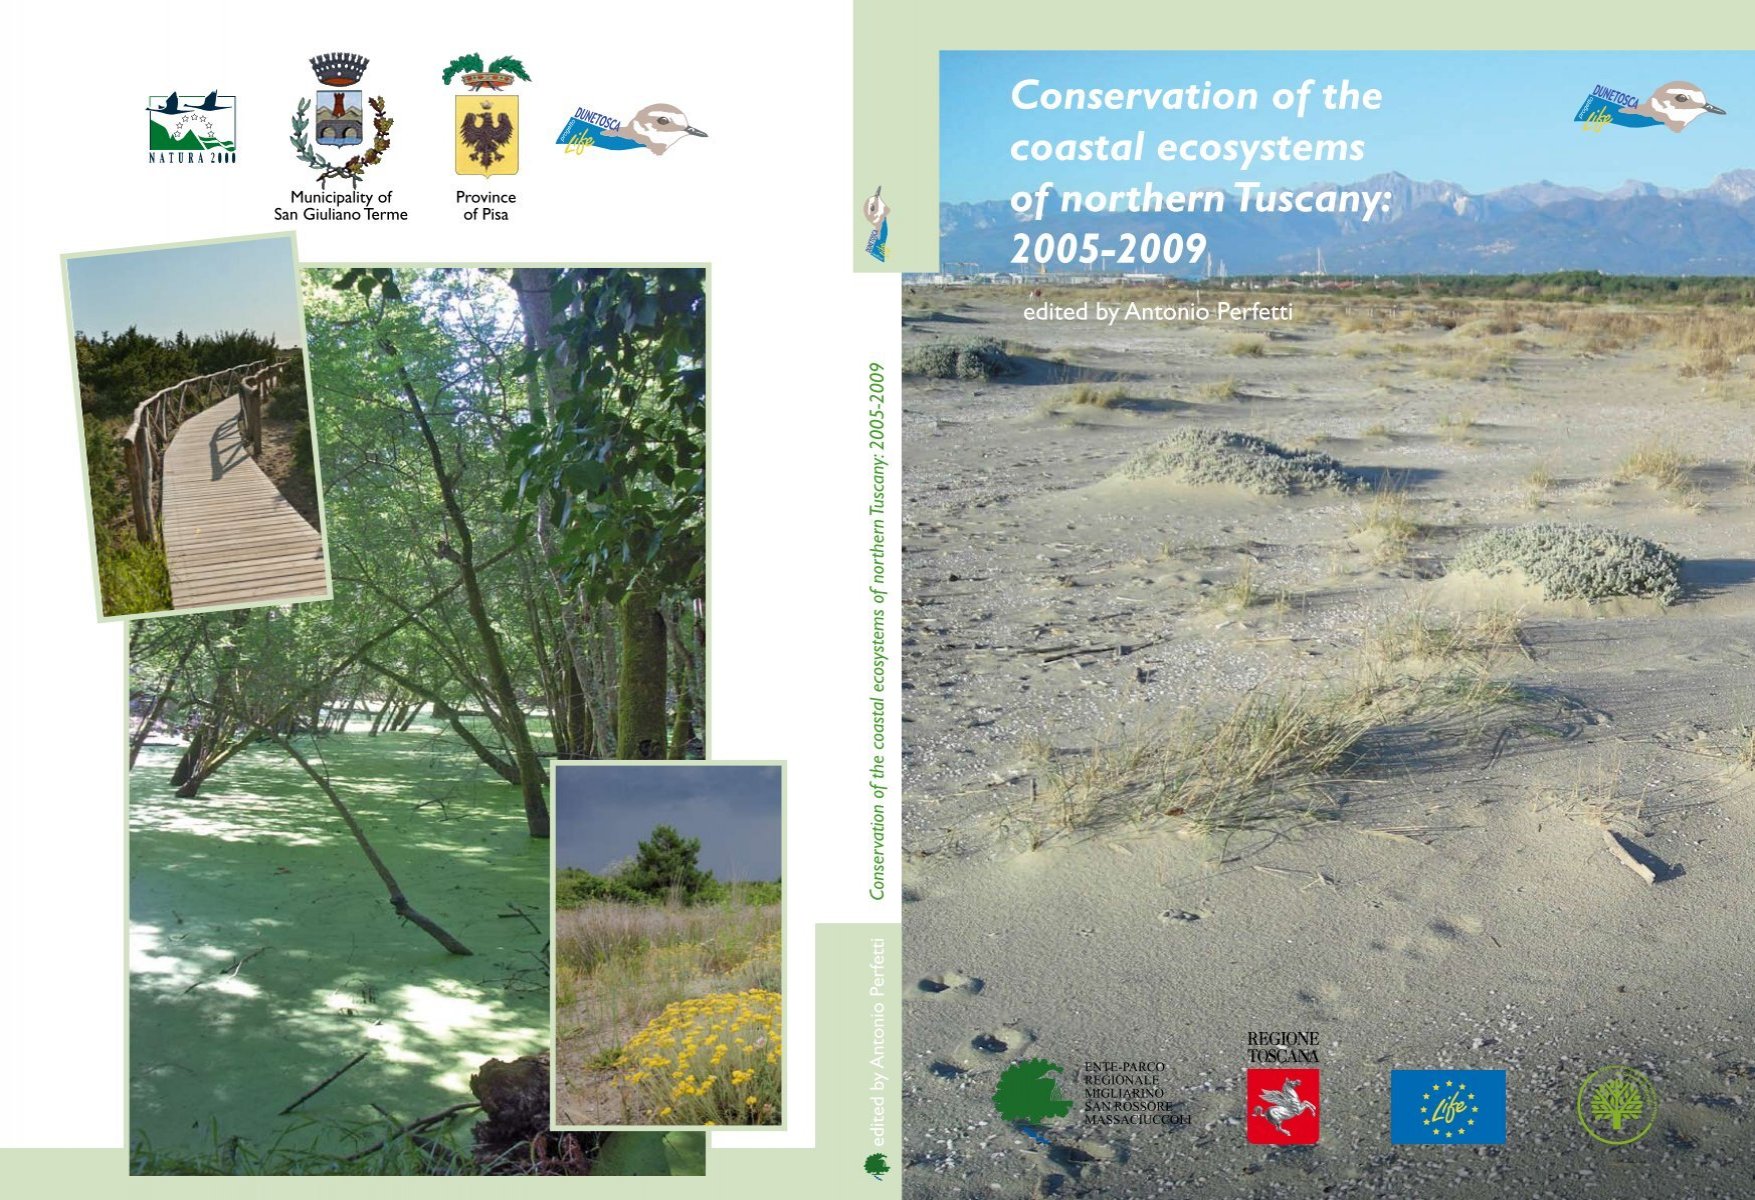 Conservation of the coastal ecosystems of northern Tuscany - Parco